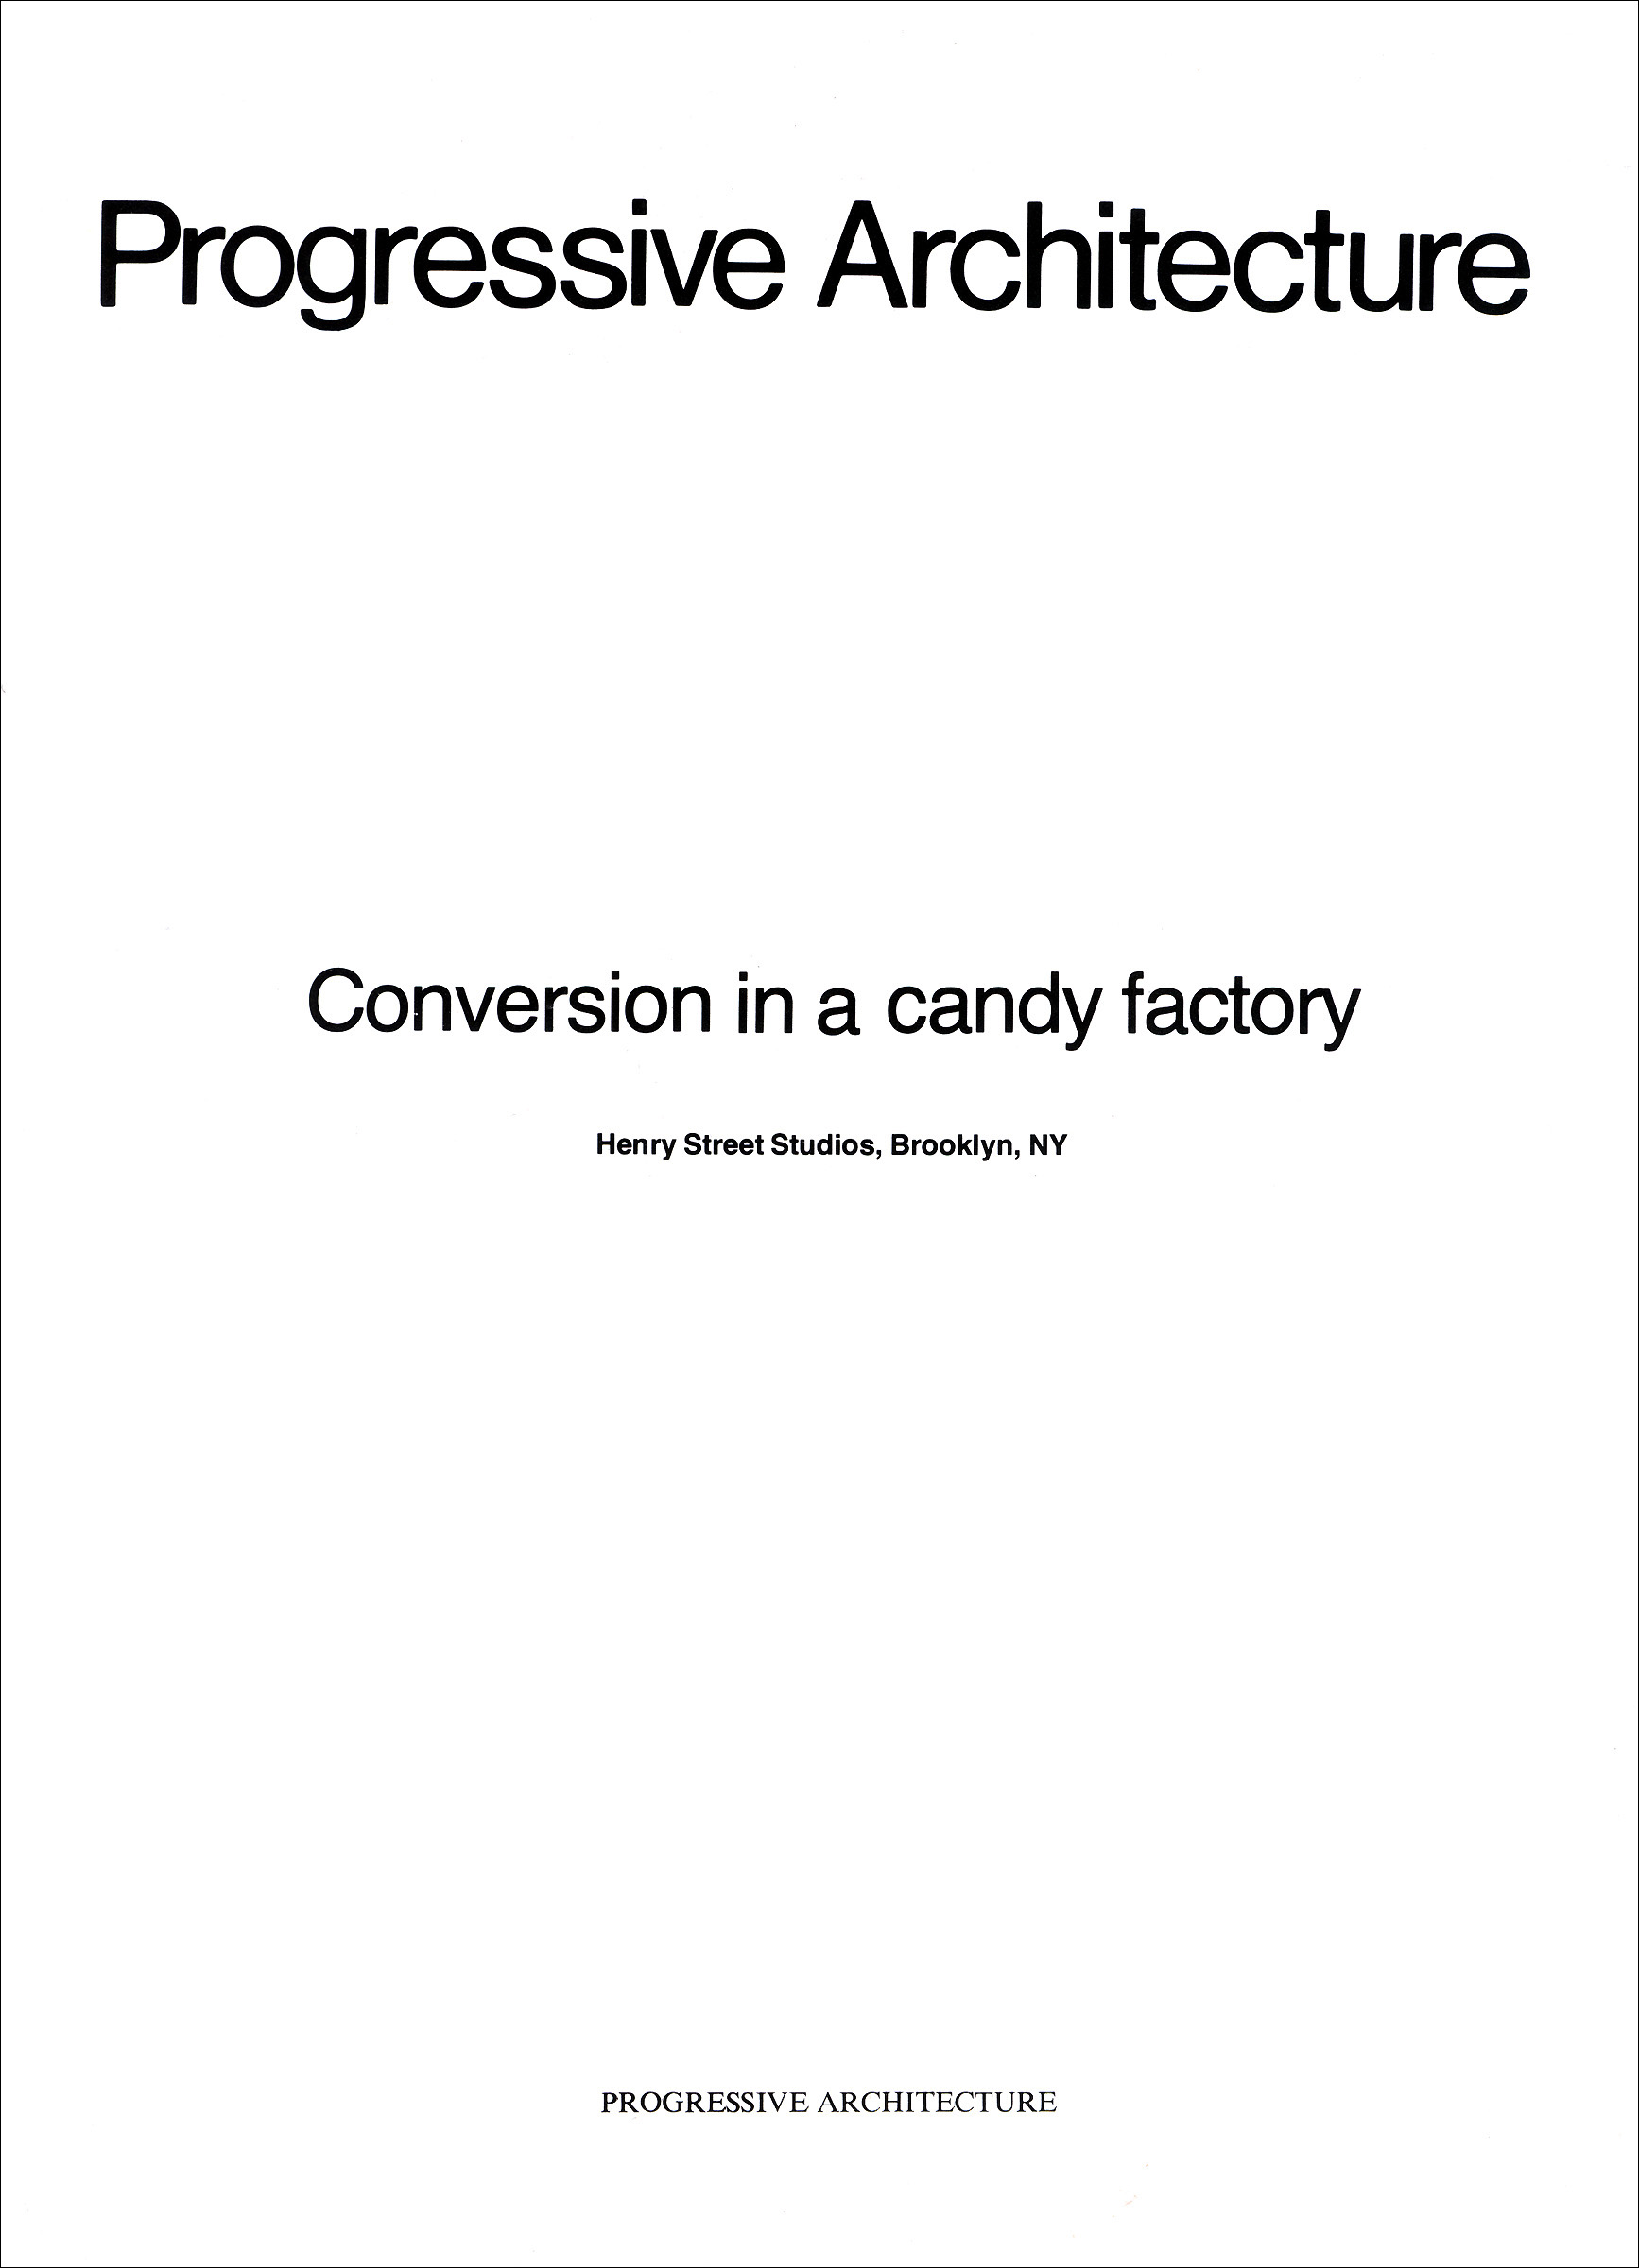 Conversion in a candy factory